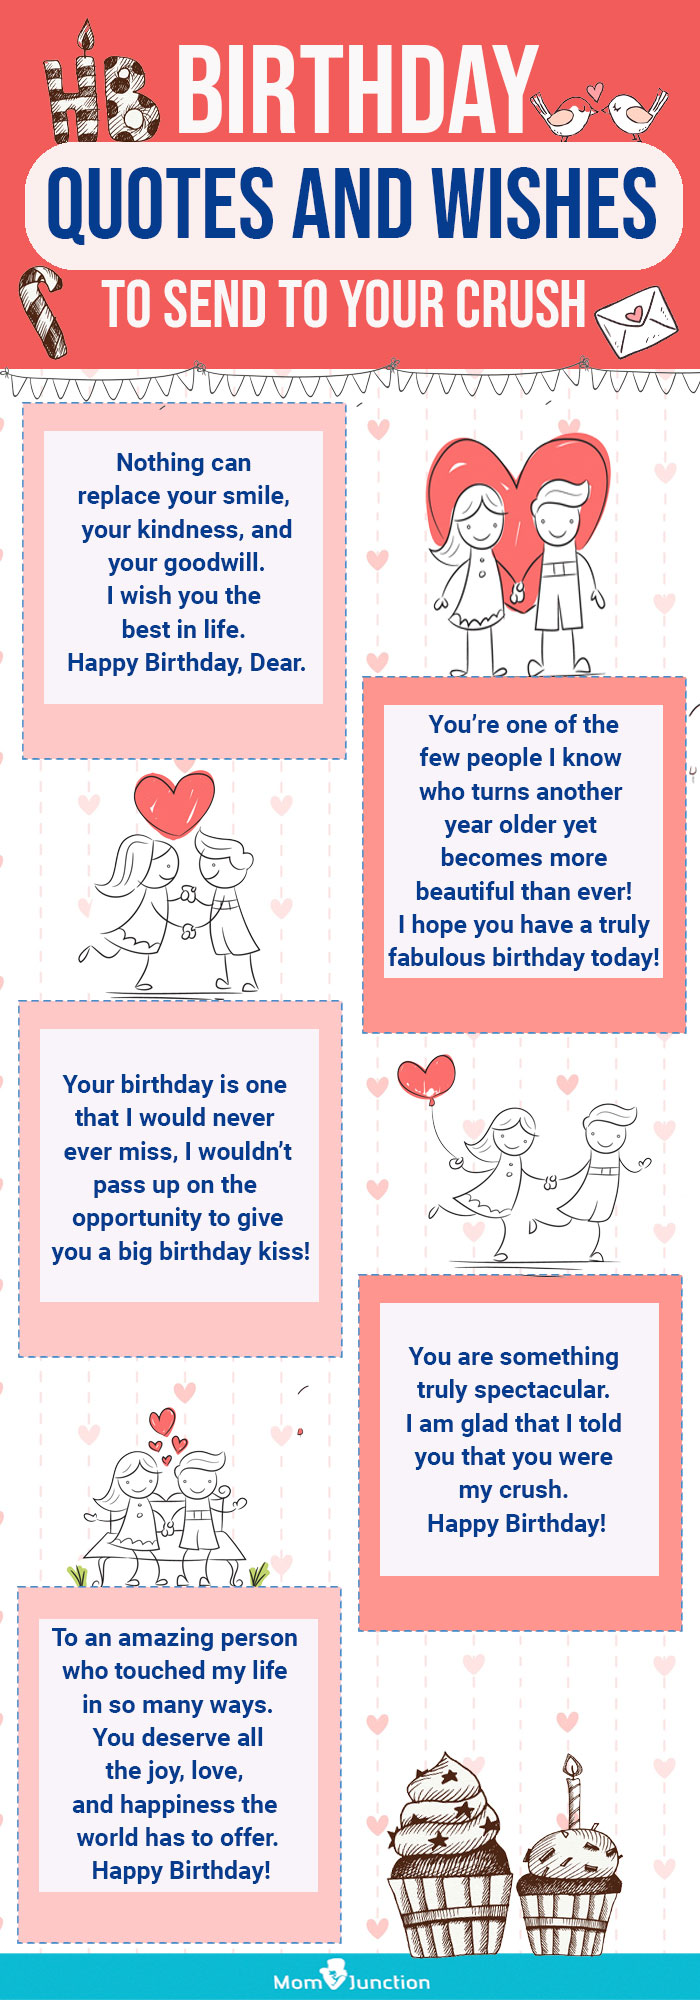 Birthday Quotes And Wishes To Send To Your Crush